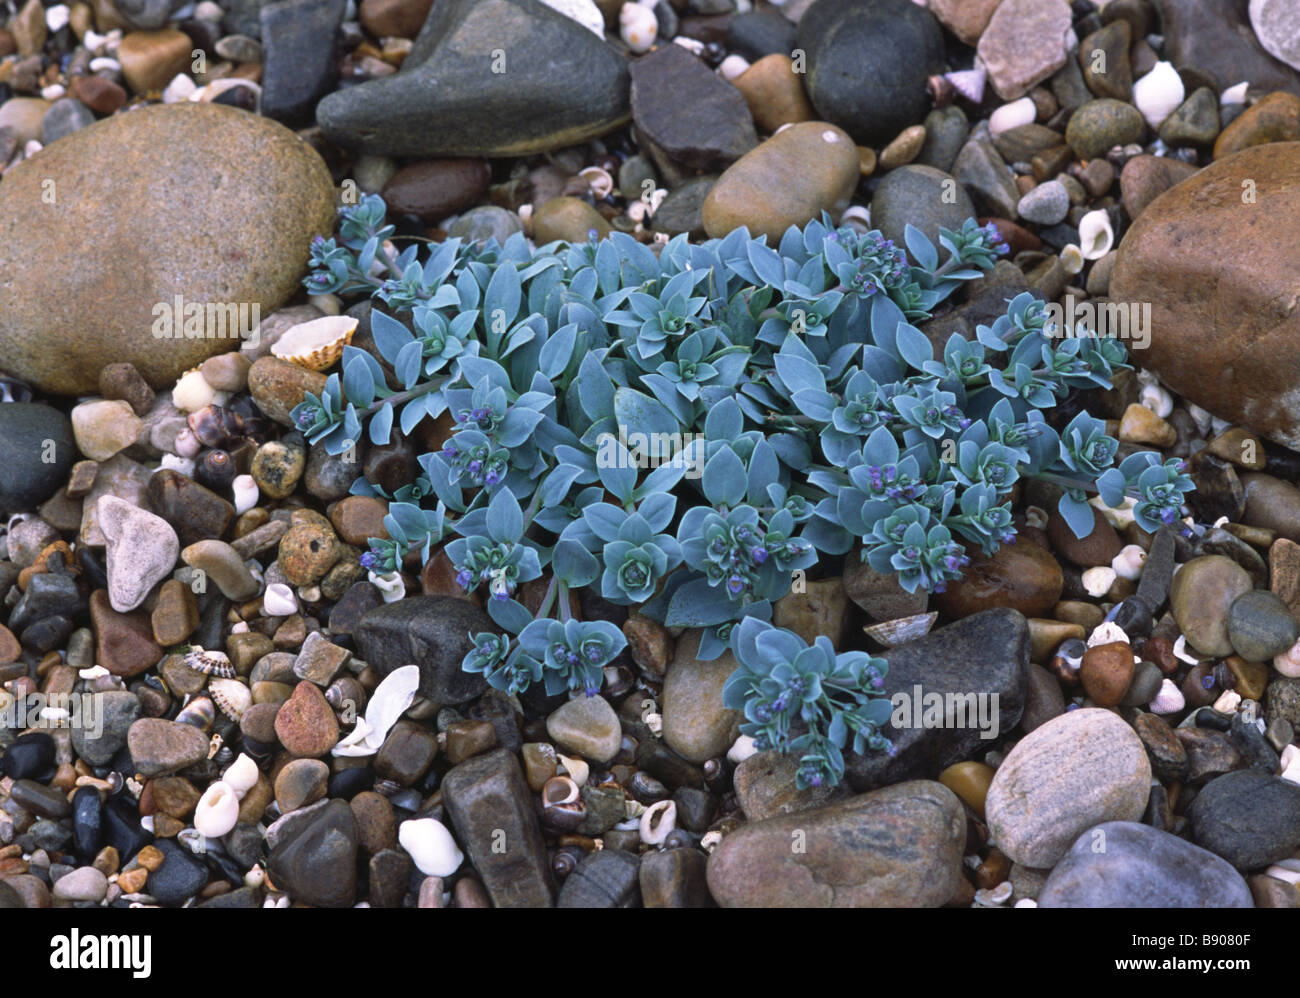 The rare Oysterplant found on a shingle beach in Scotland Moray Firth Stock Photo